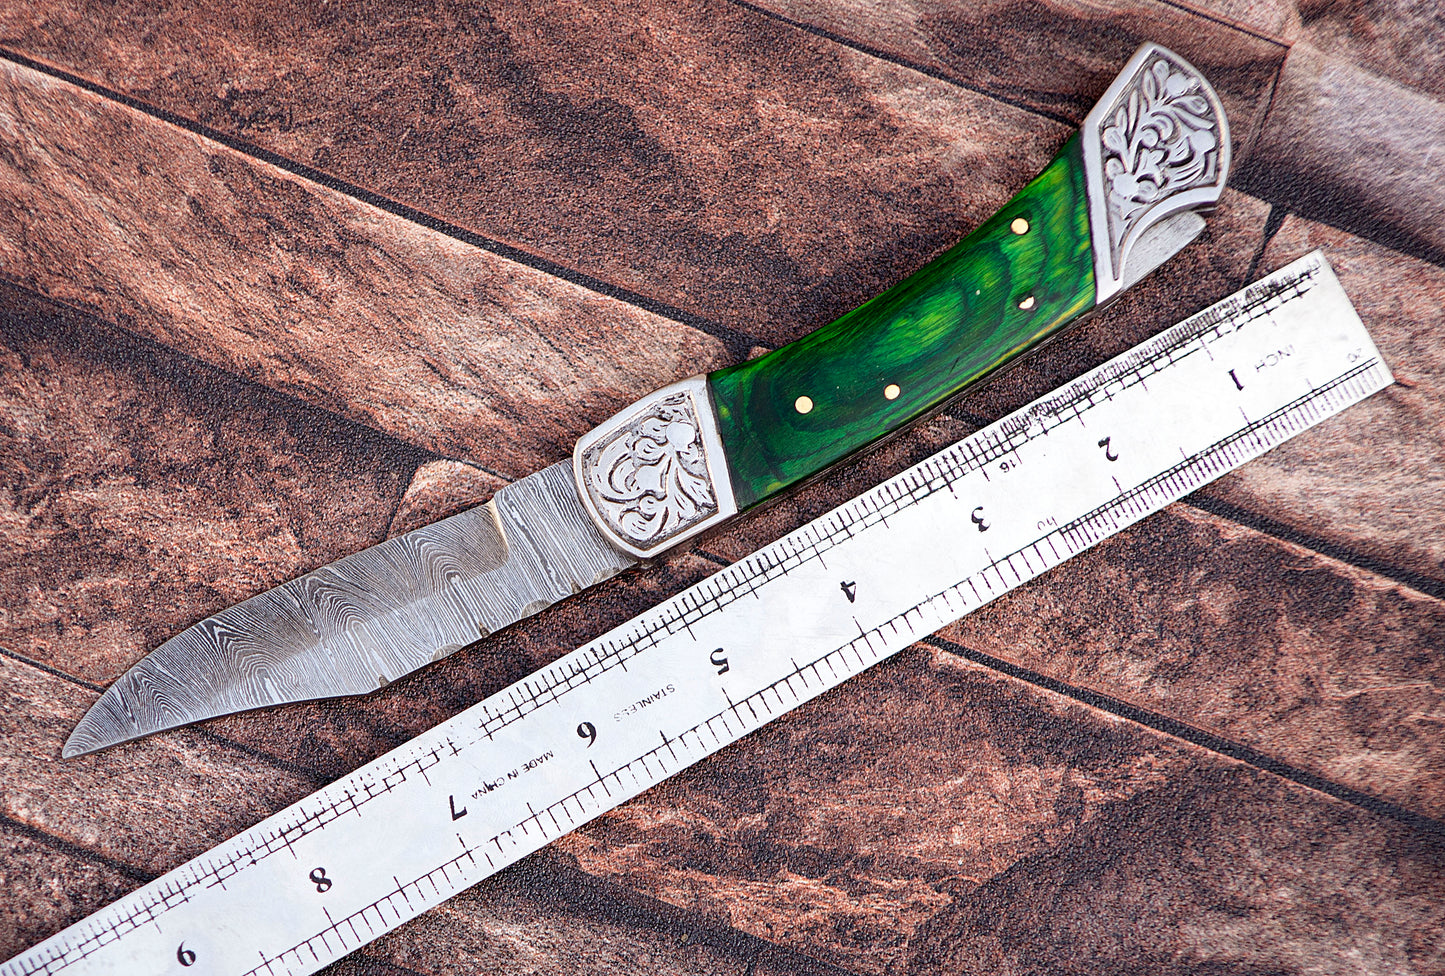 9" long back lock Folding Knife, Green wood Scale with Engraved steel bolster, custom made 4" Hand Forged Damascus steel blade, Cow hide leather sheath with belt loop